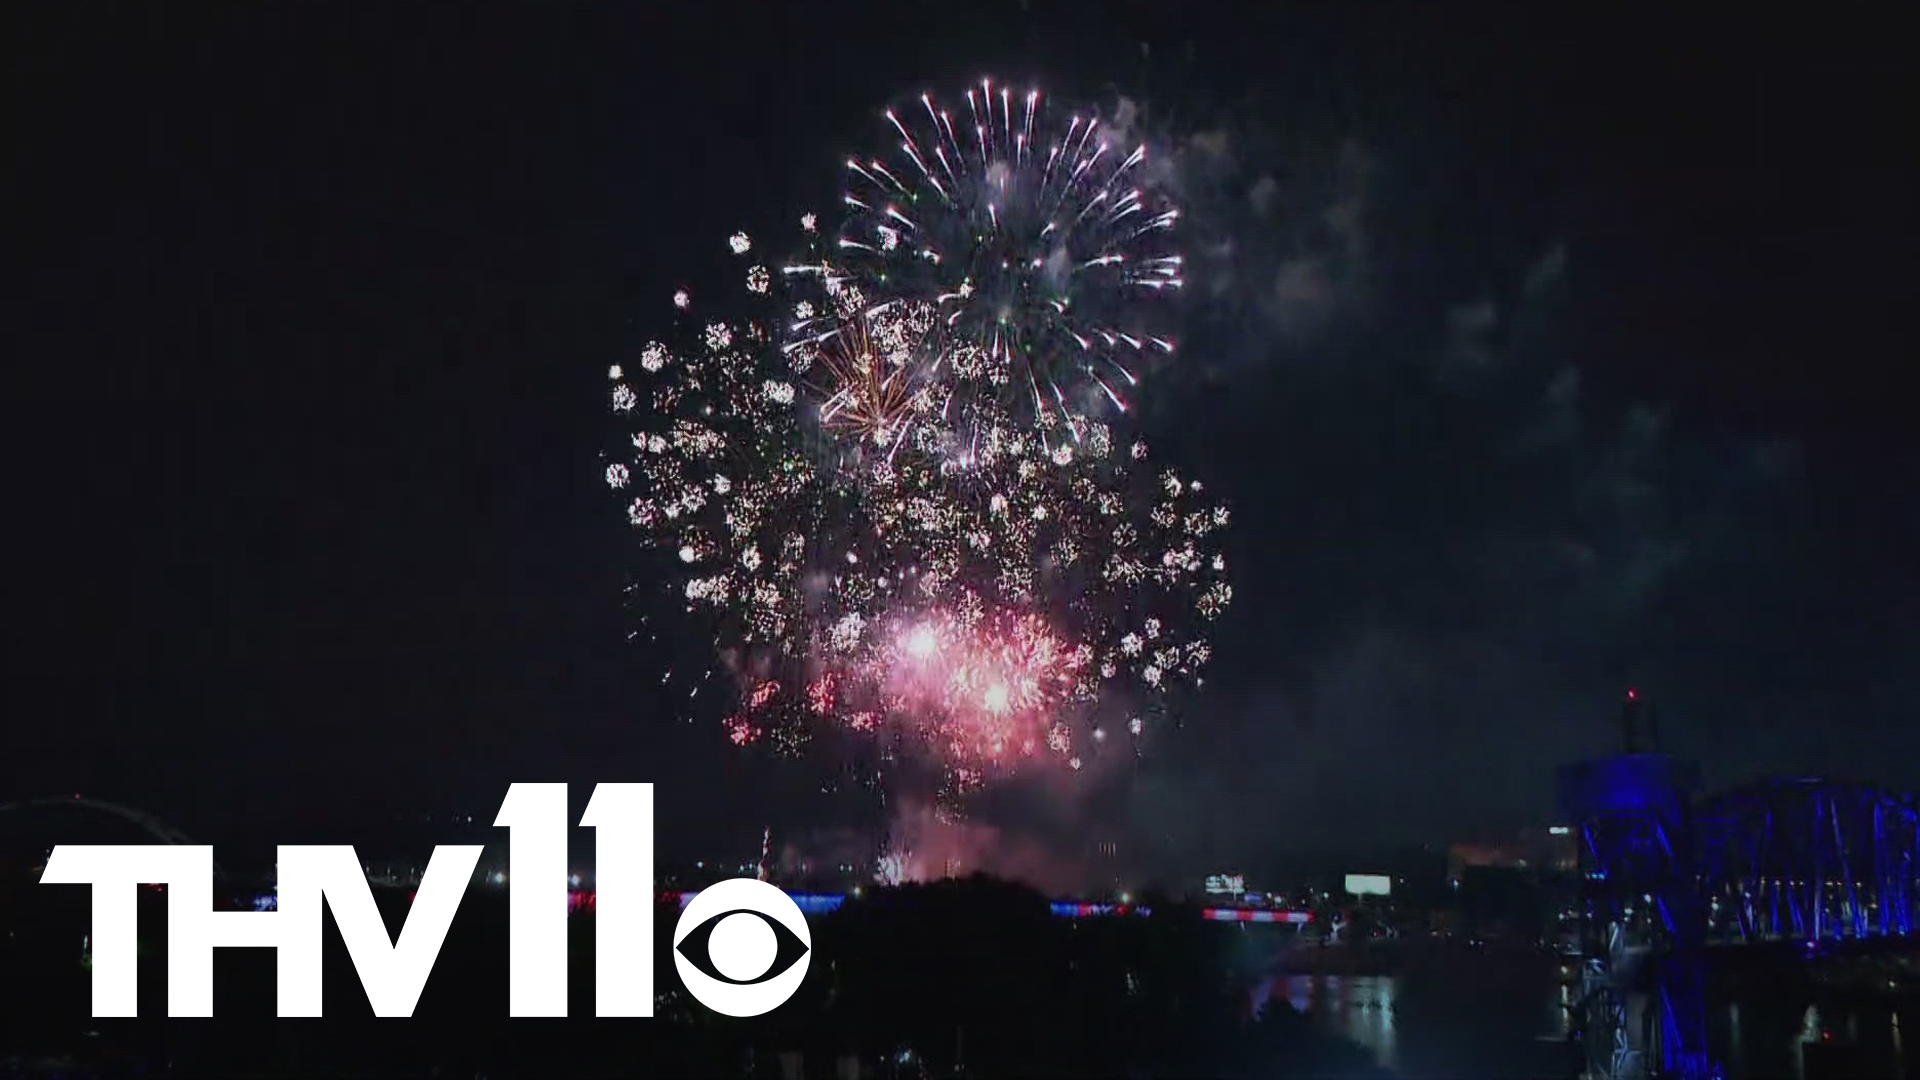 Arkansans came together to celebrate the Fourth of July at Pops on the River in Little Rock, one of the largest Independence Day celebrations in the state.